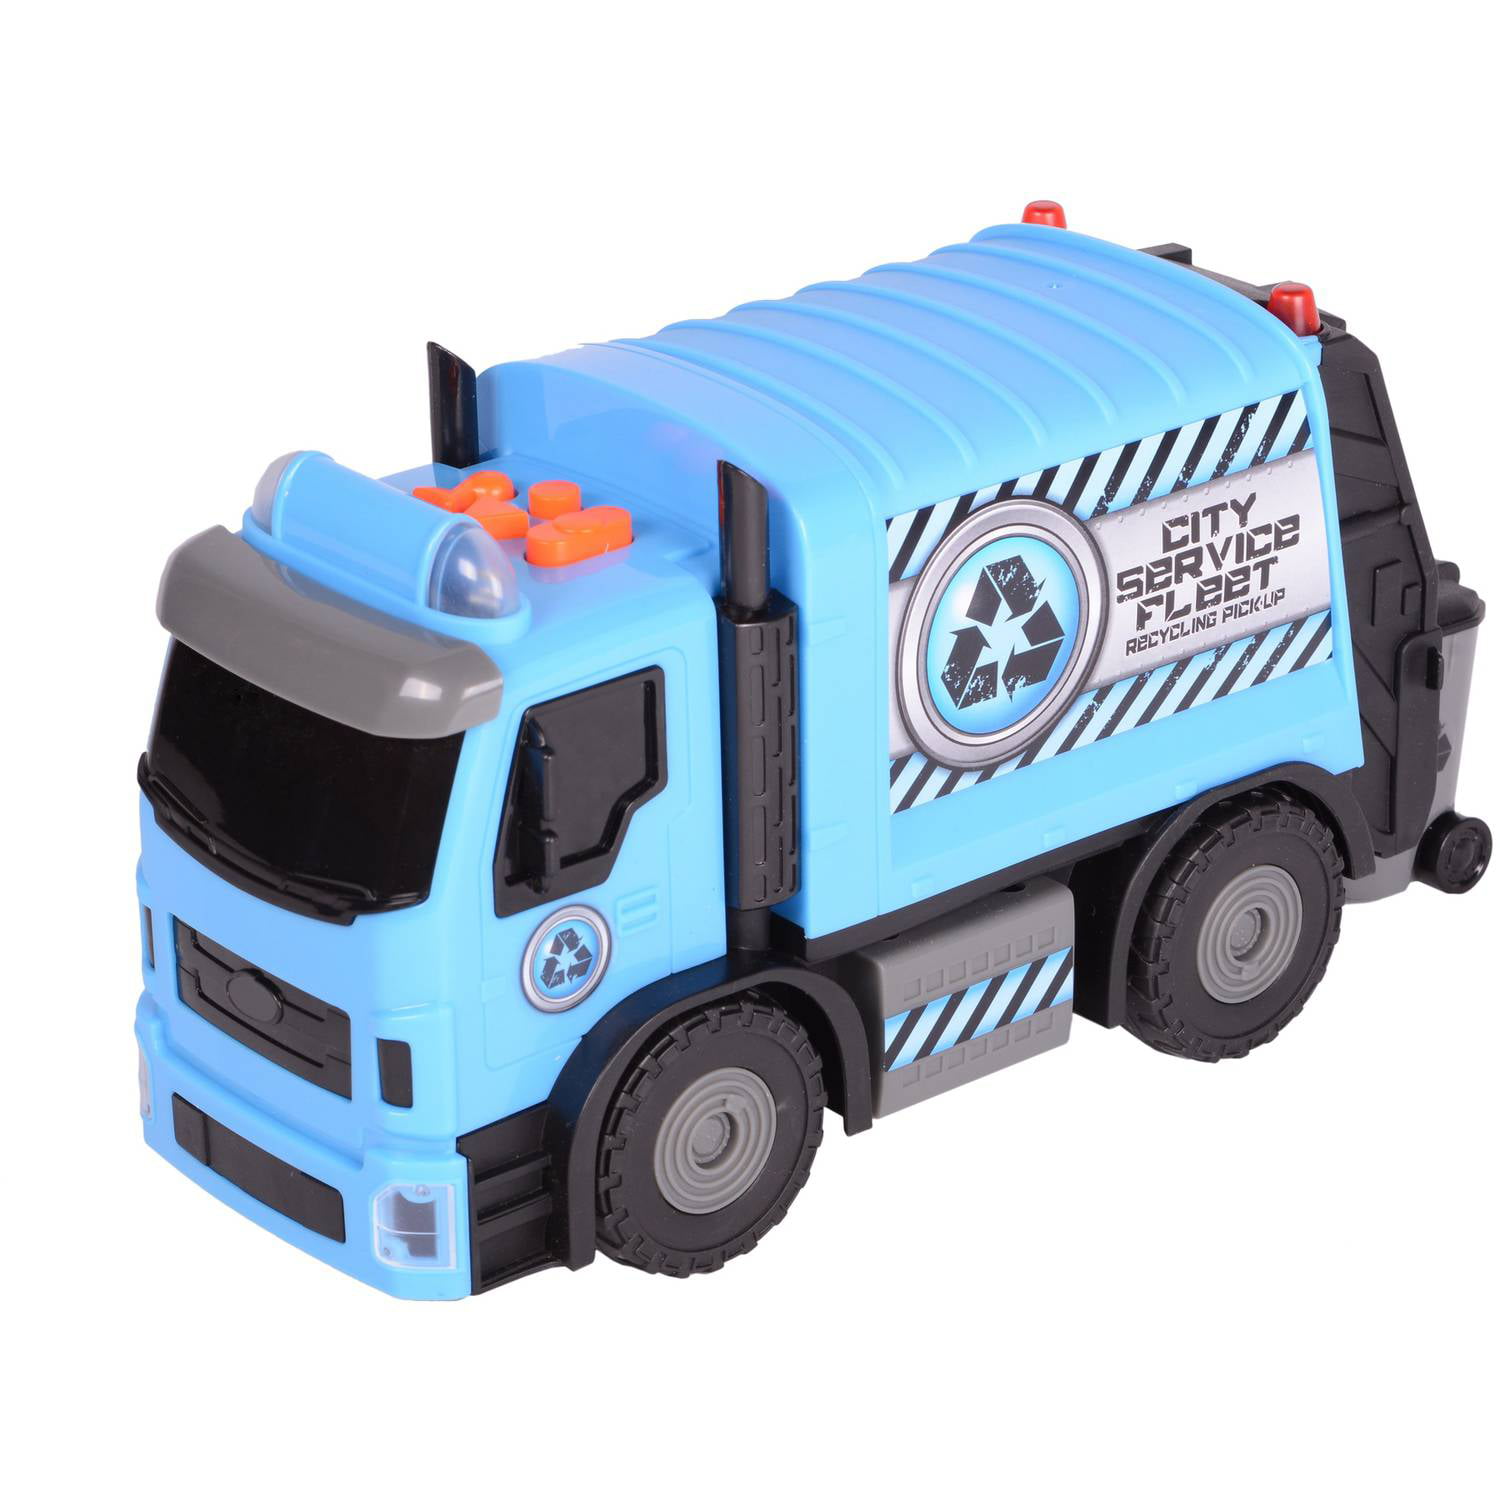 adventure force recycling truck